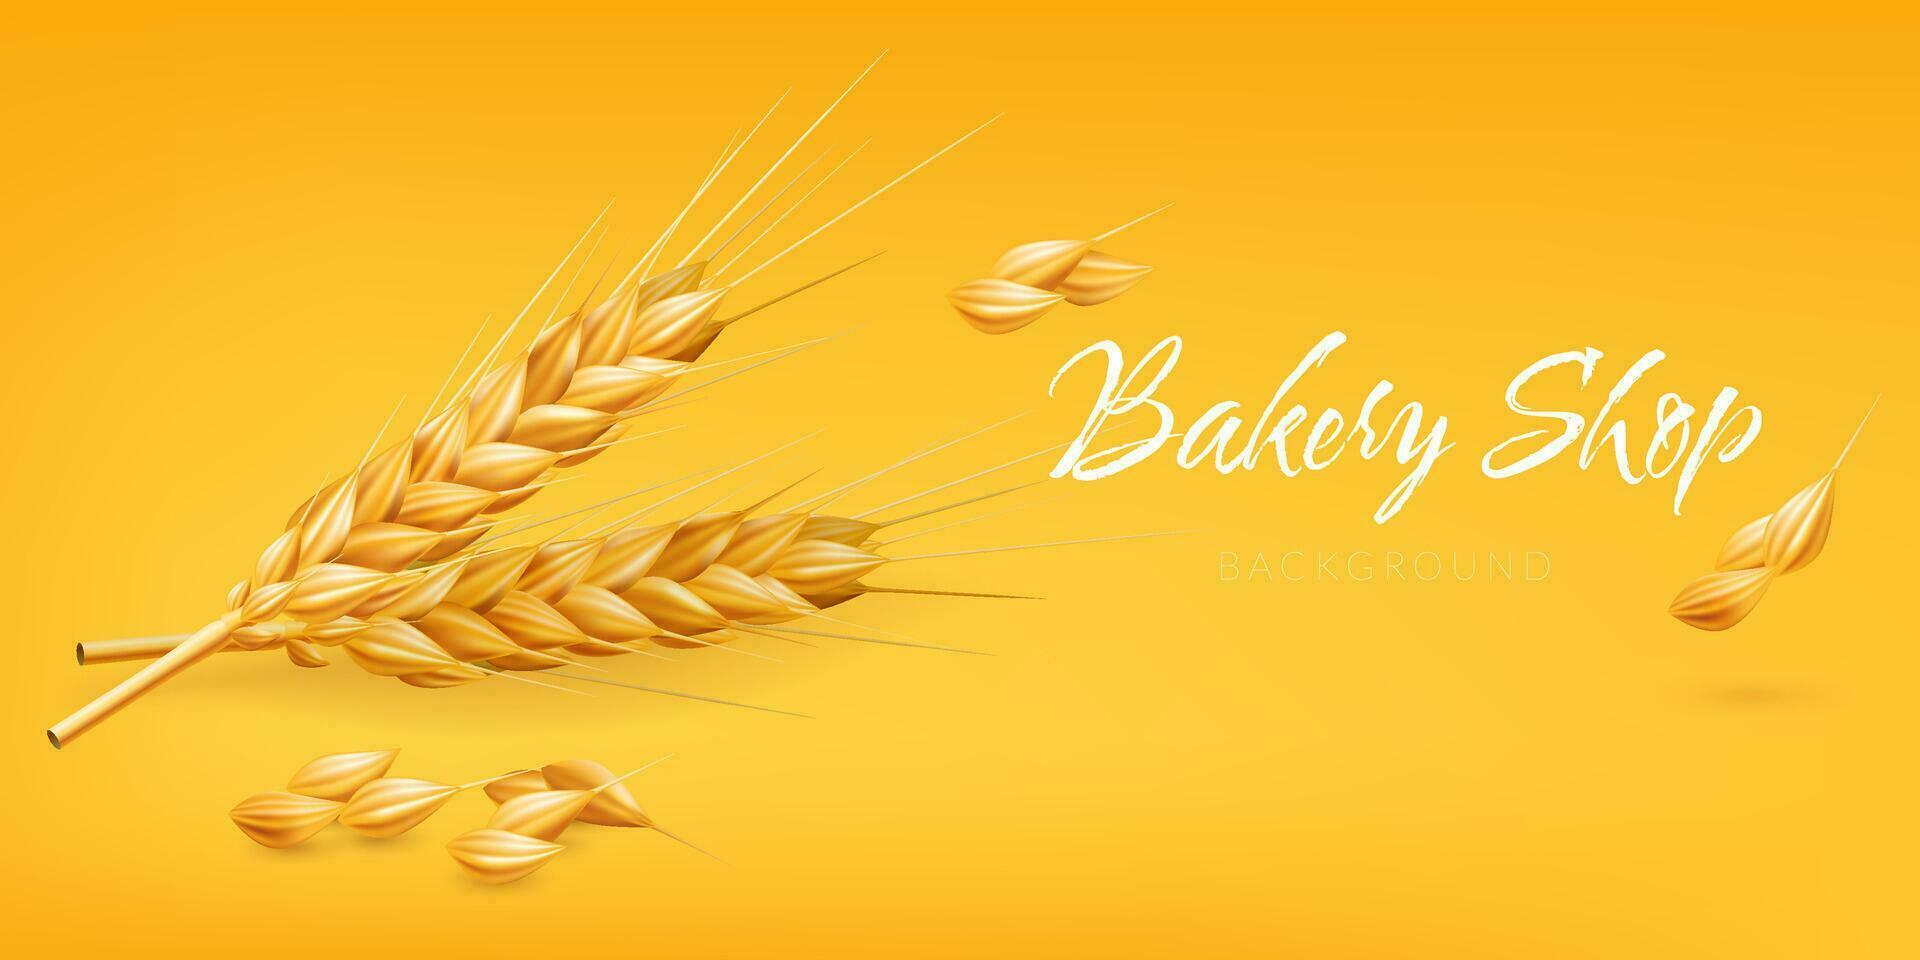 Realistic 3D illustration of a golden ear of wheat on a yellow background with seed. Perfect for bakery shops, agriculture related designs. Represents autumn harvest, natural ingredients, healthy food vector